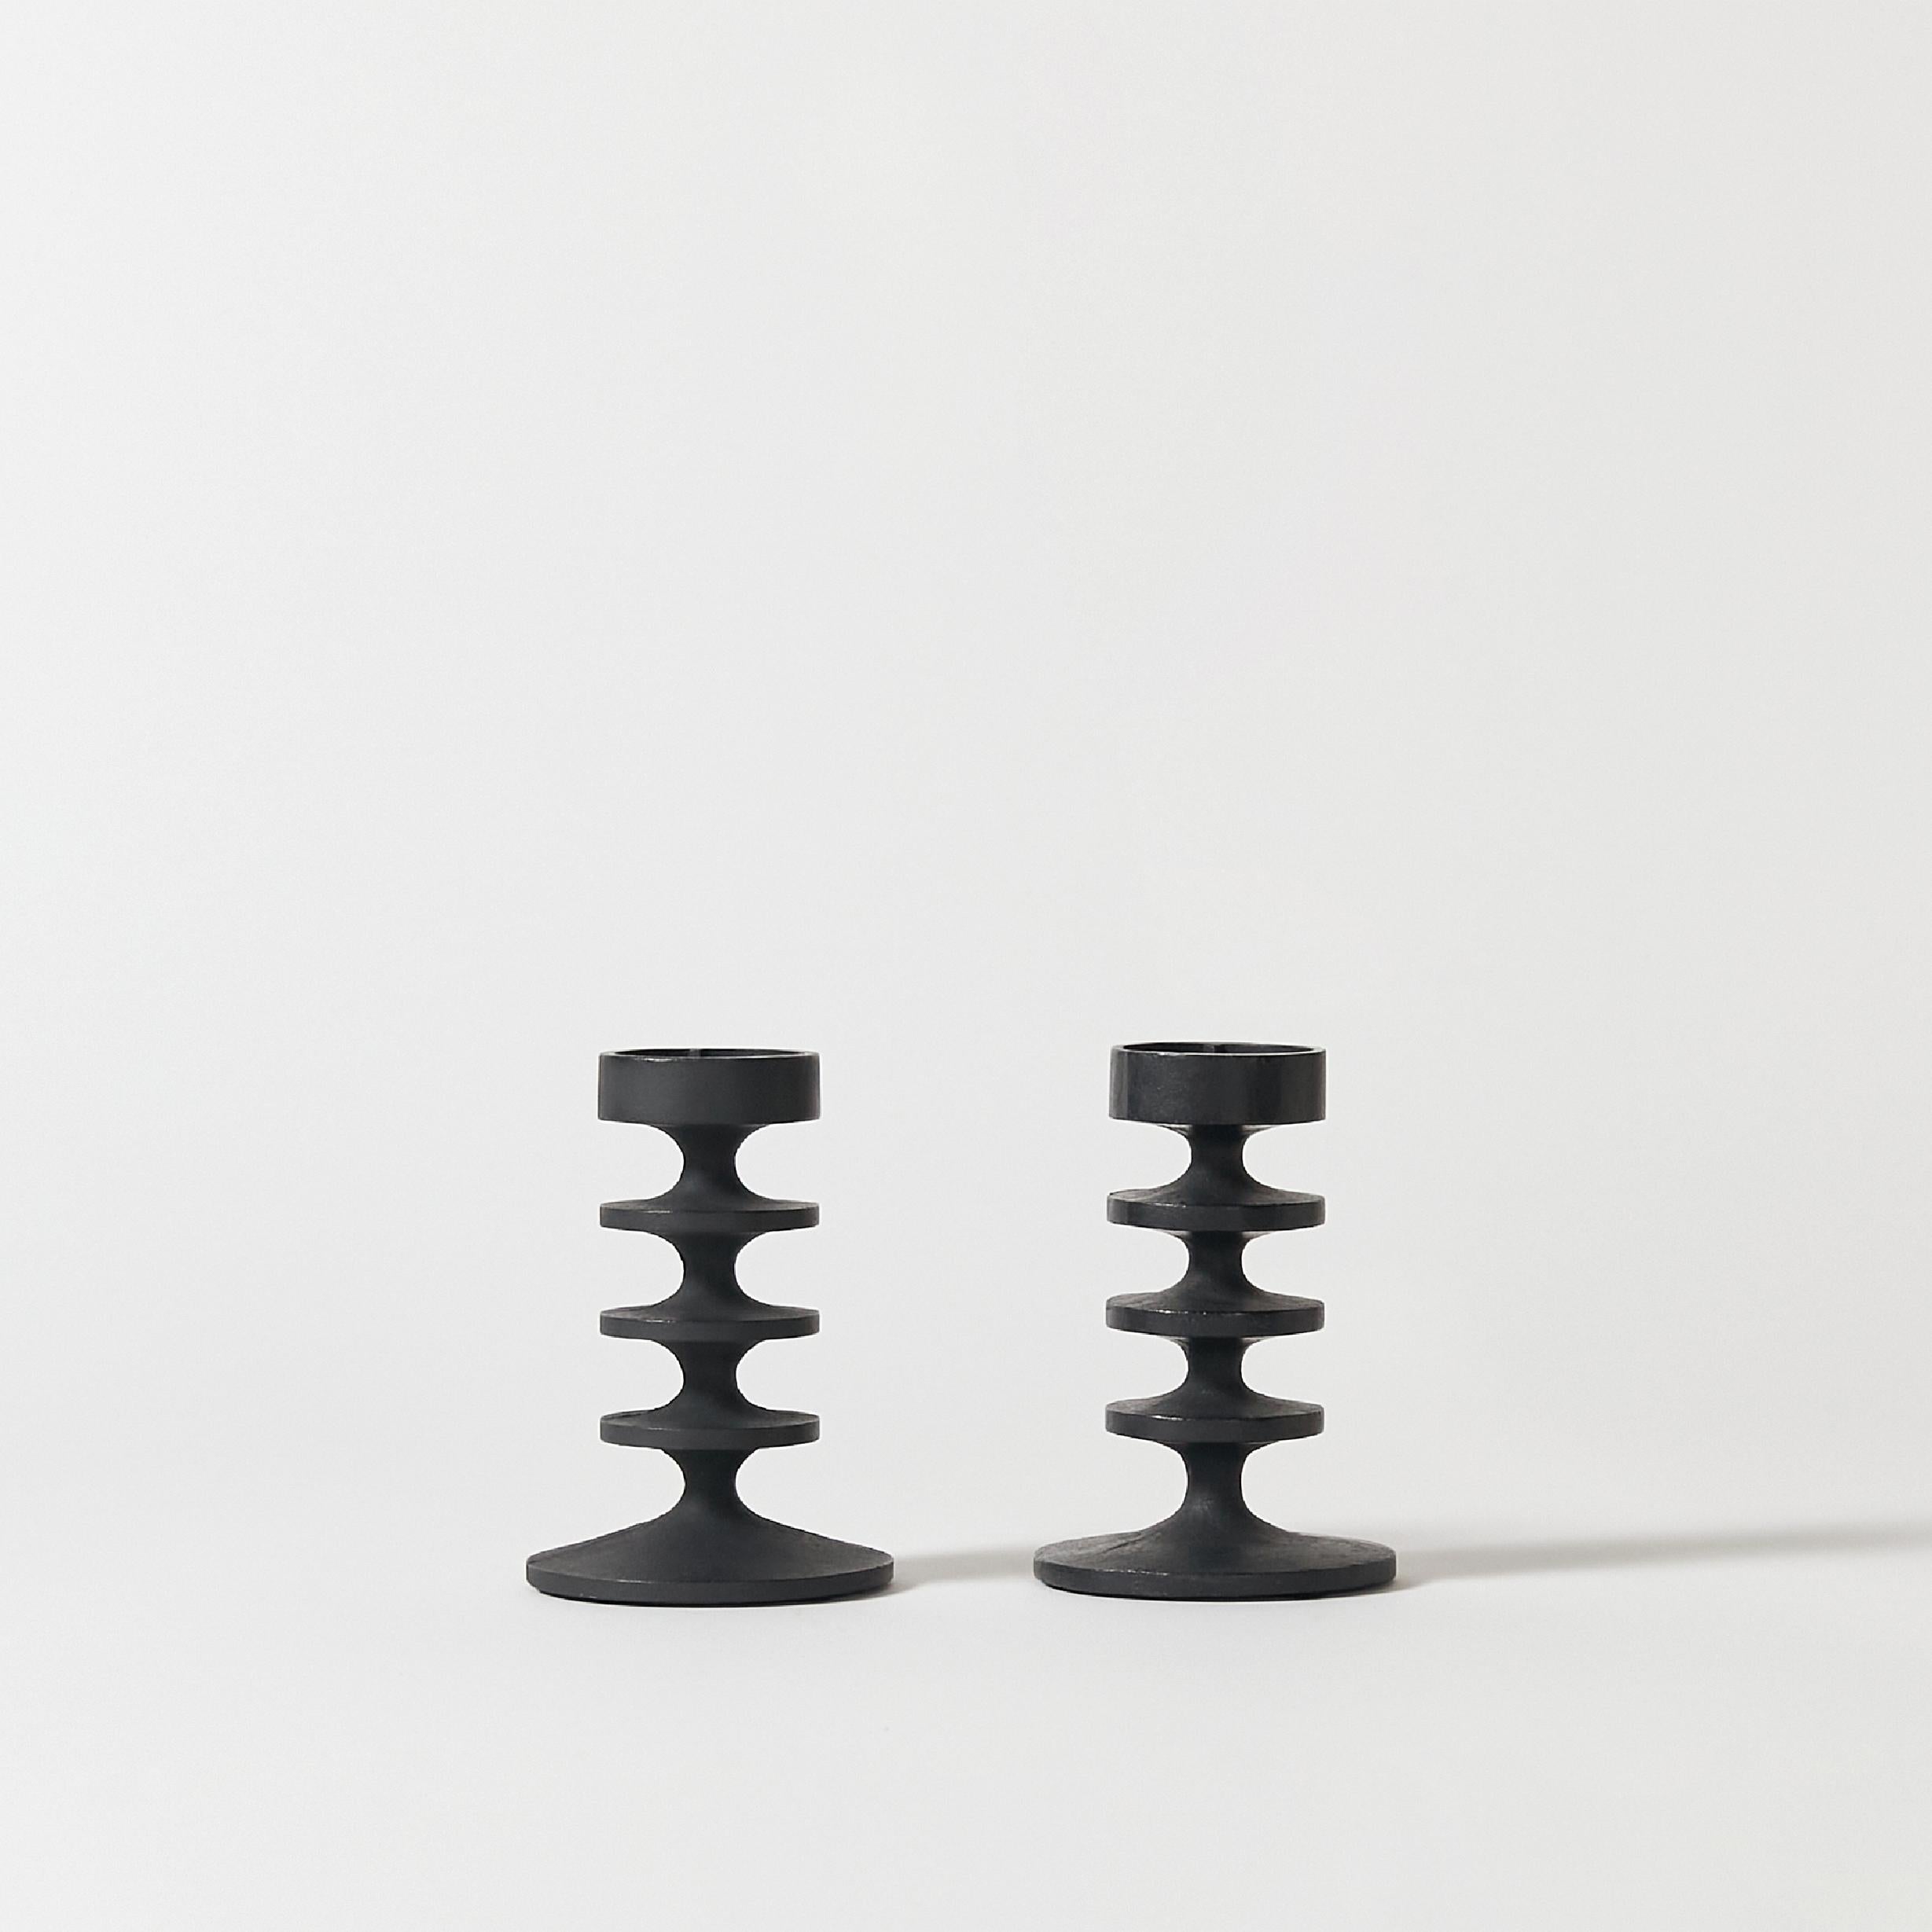 Set of two candlesticks in blackened cast iron designed by Robert Welch. Signature stamp on bottom.